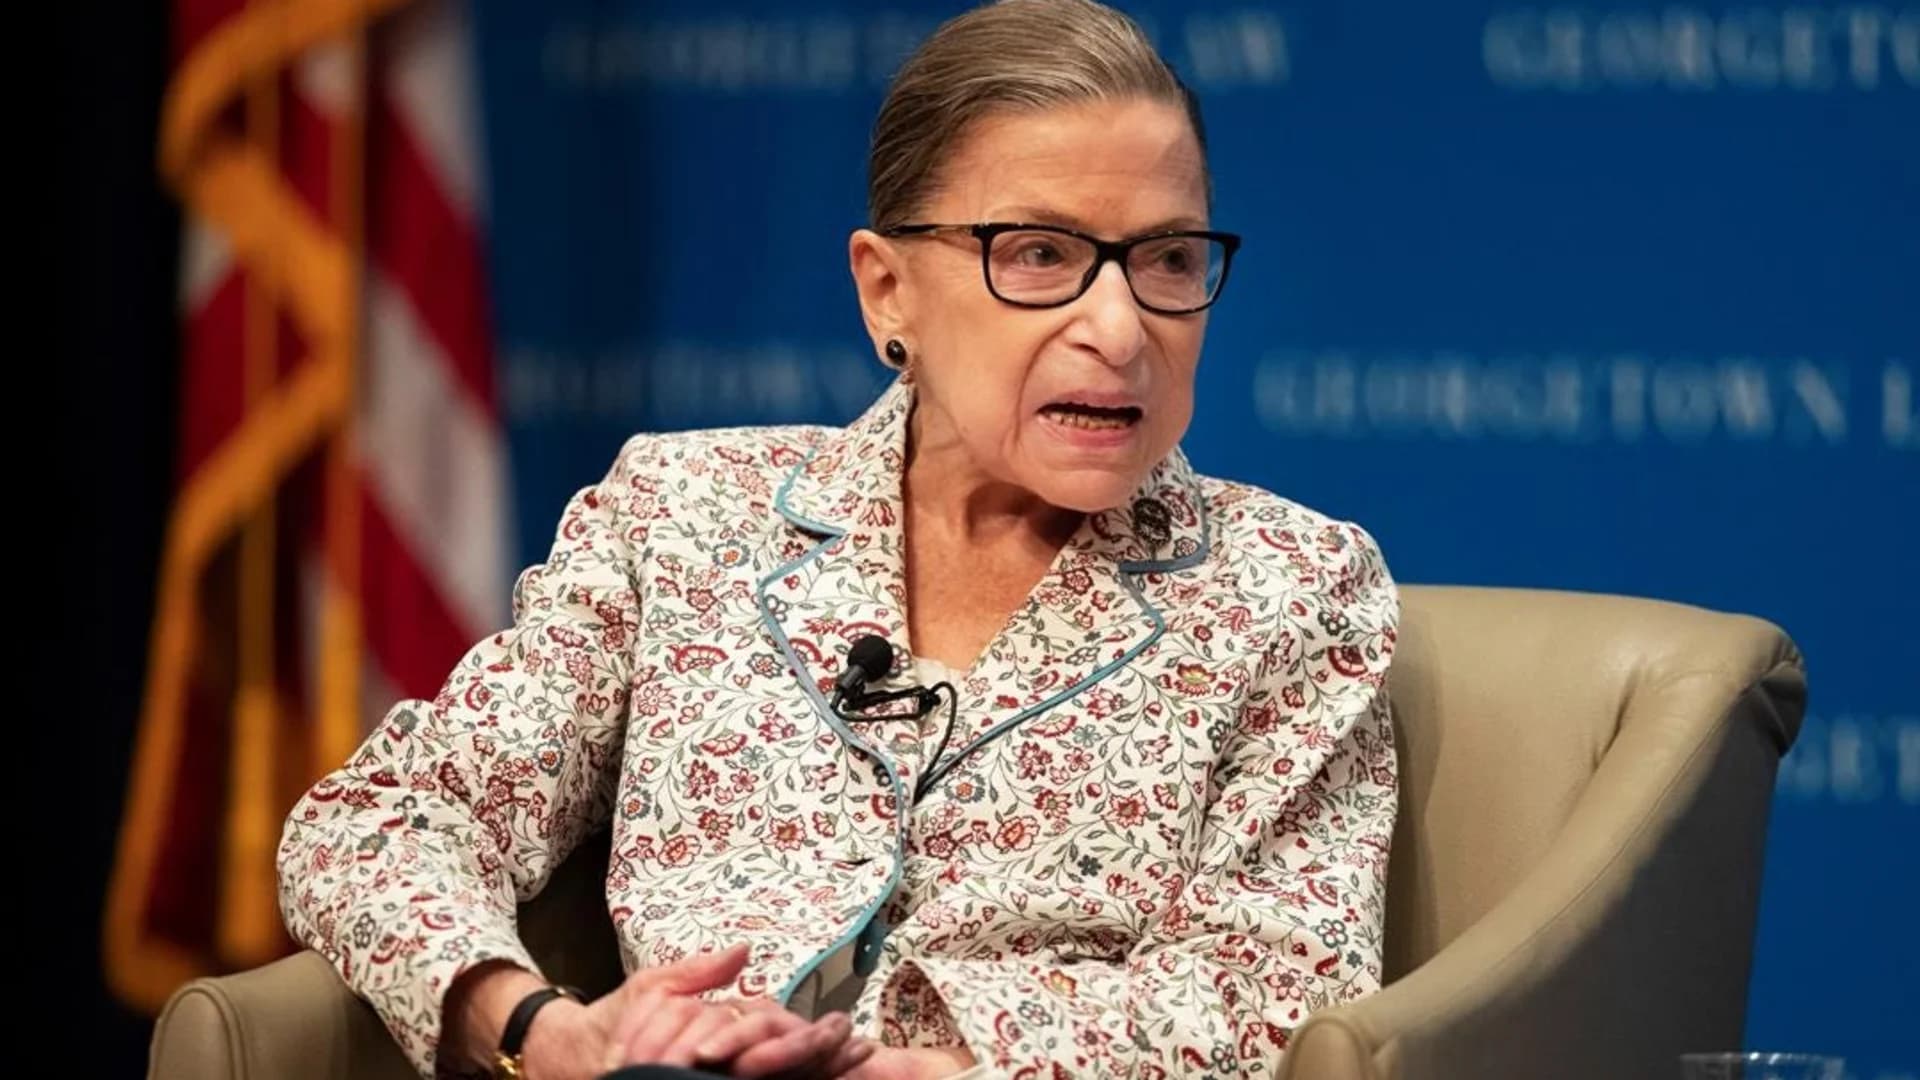 Supreme Court: Ruth Bader Ginsburg treated for tumor on pancreas